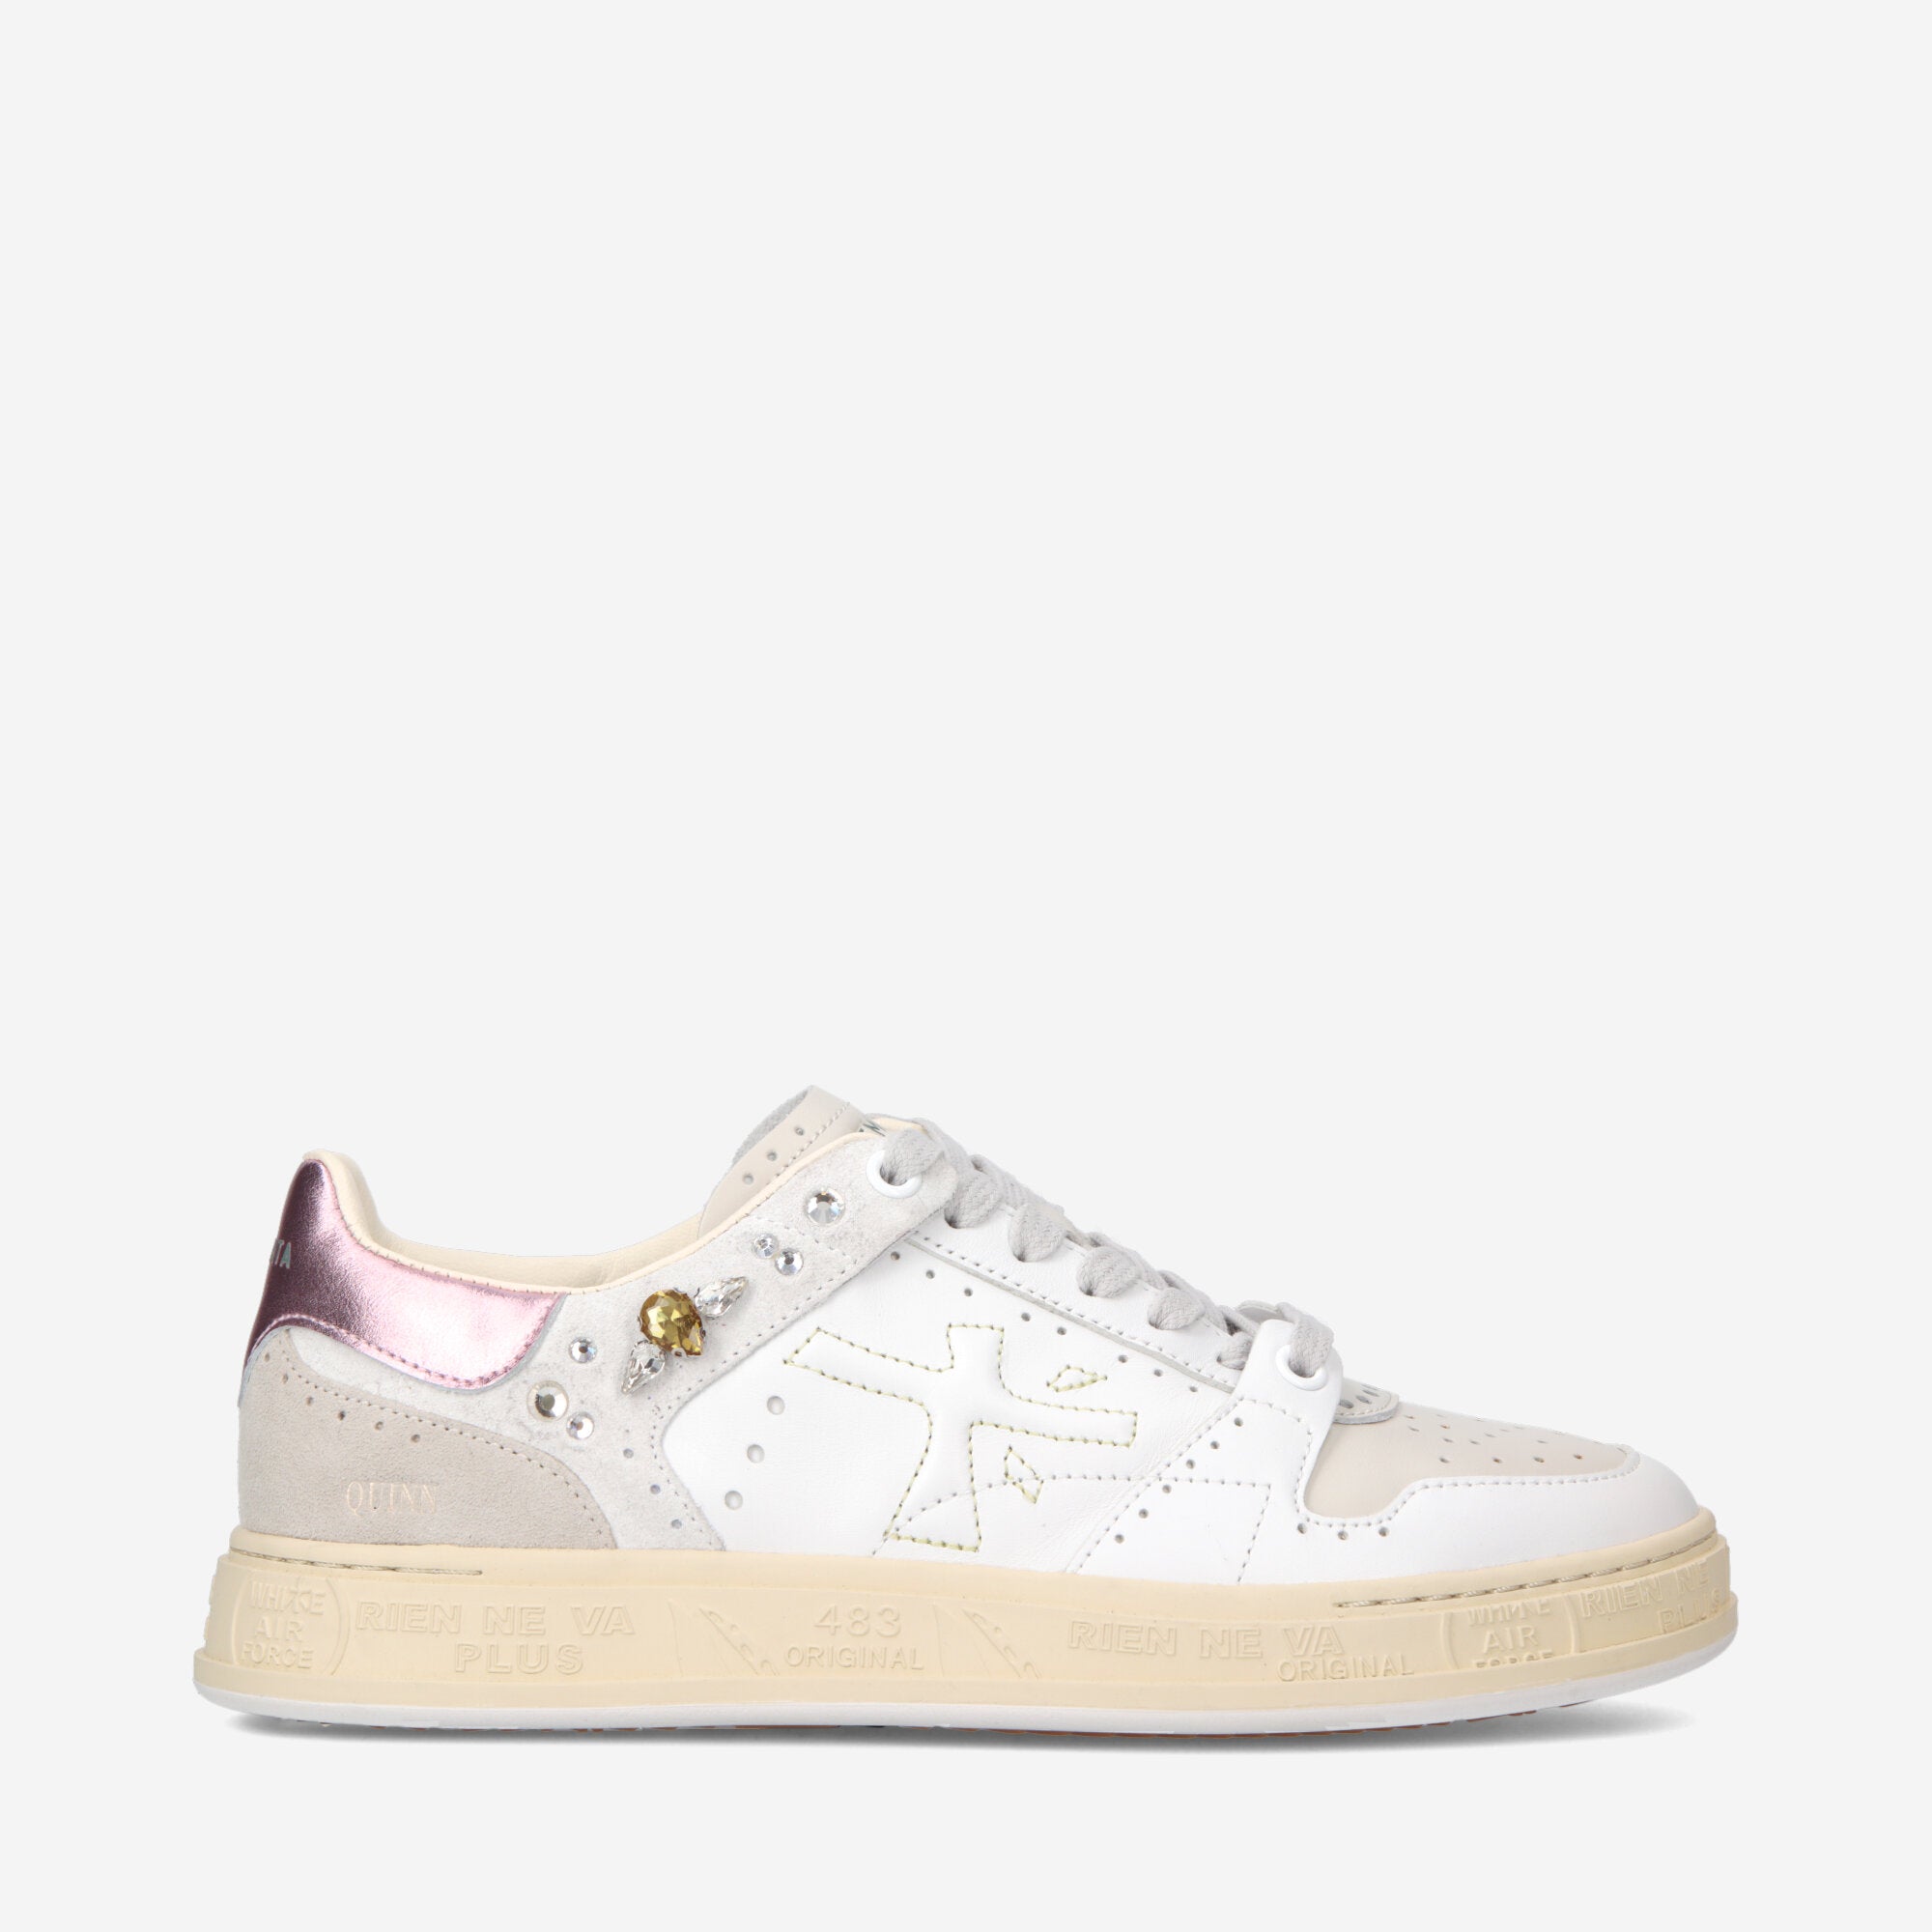 Quinn Premiata Women's Timeless White Leather Sneaker With Crystals